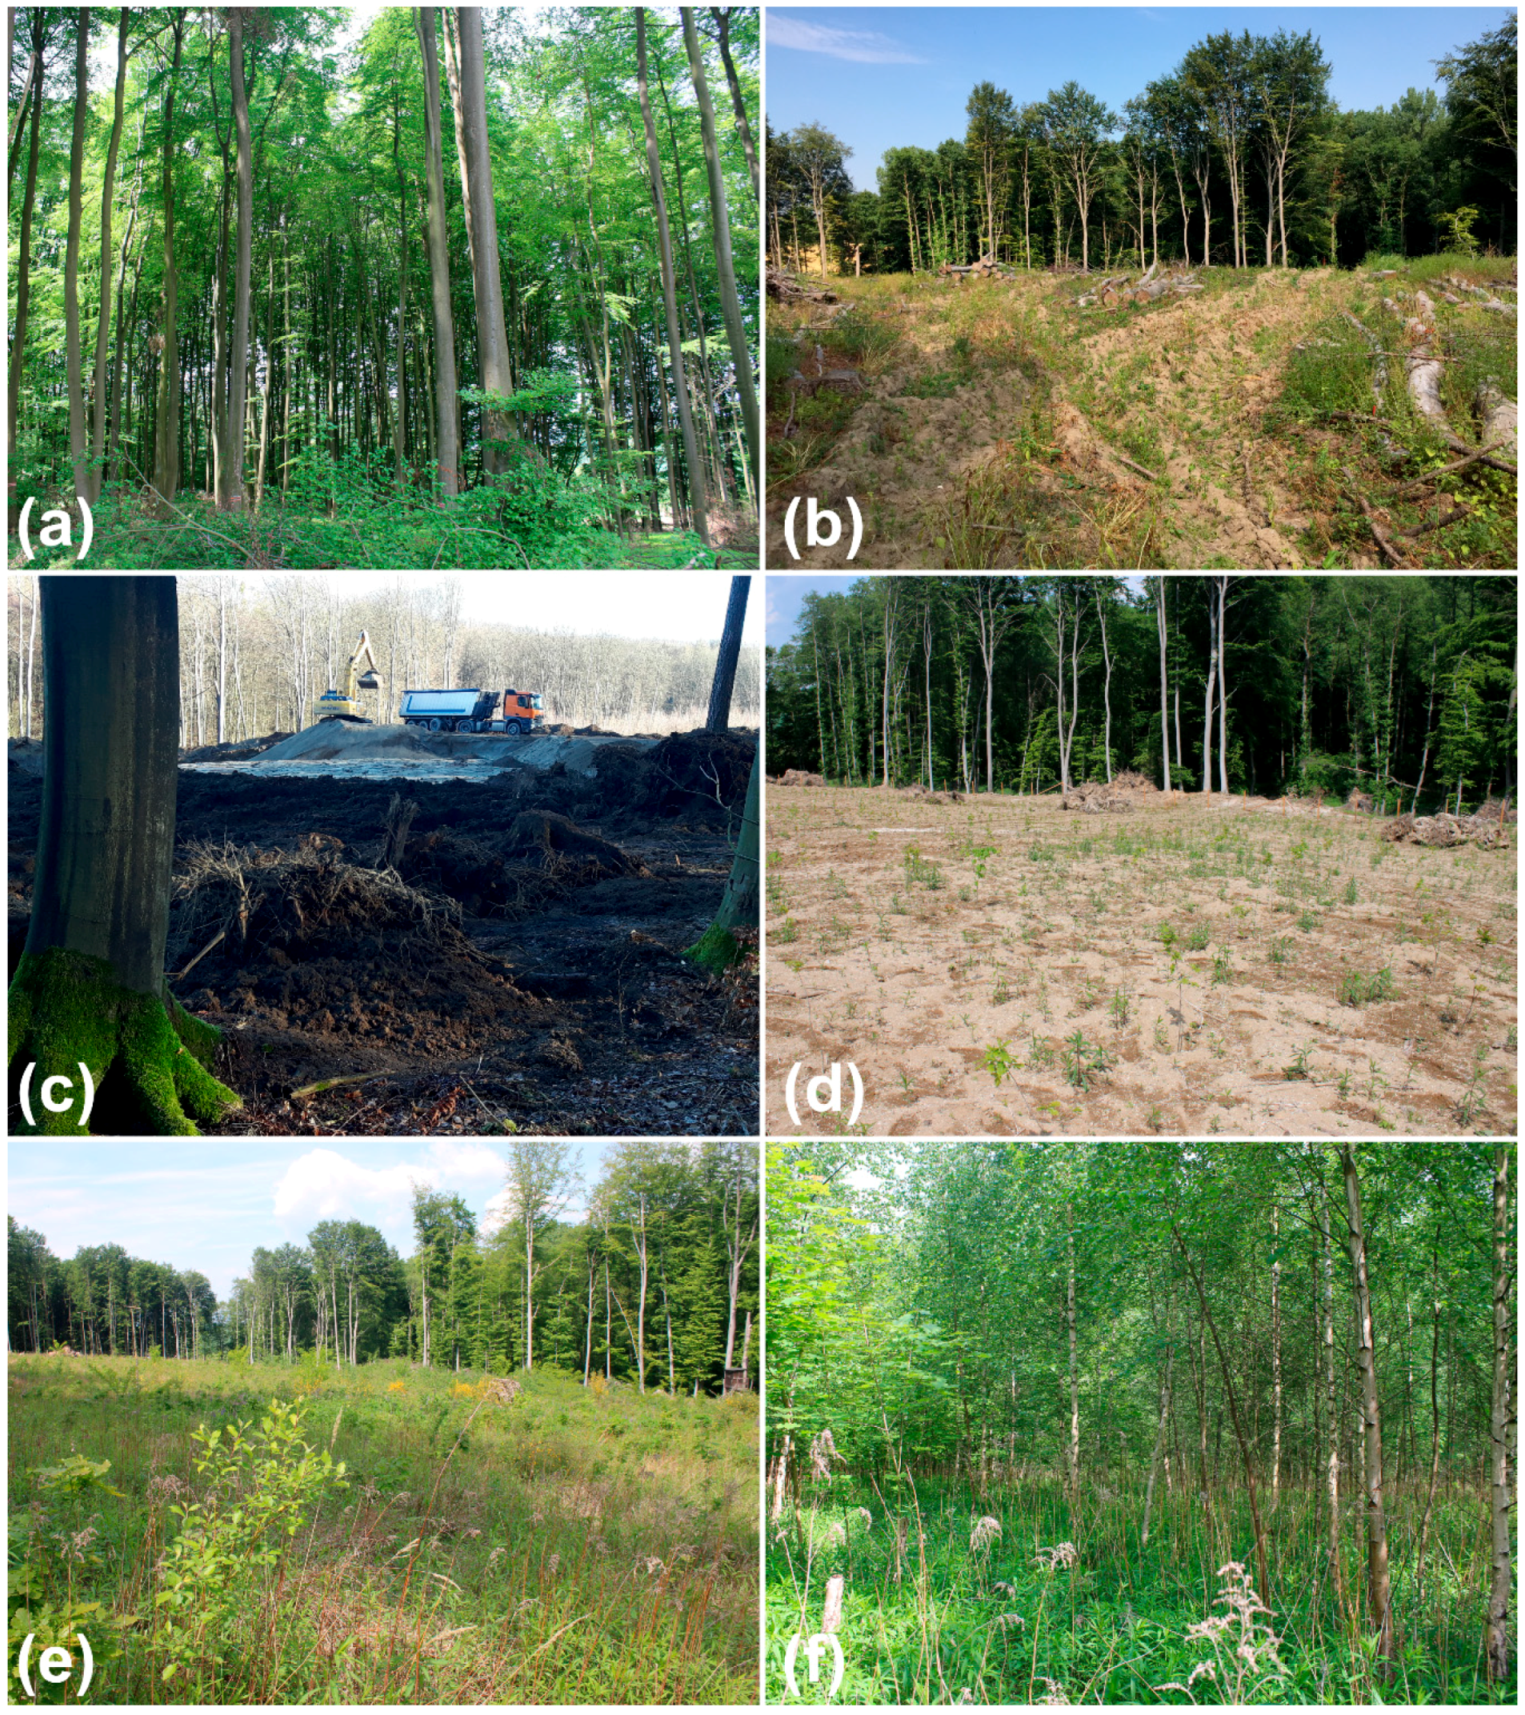 Soil Systems | Free Full-Text | Modeling Runoff-Formation and Soil Erosion  after Pumice Excavation at Forested Andosol-Sites in SW-Germany Using WEPP  | HTML